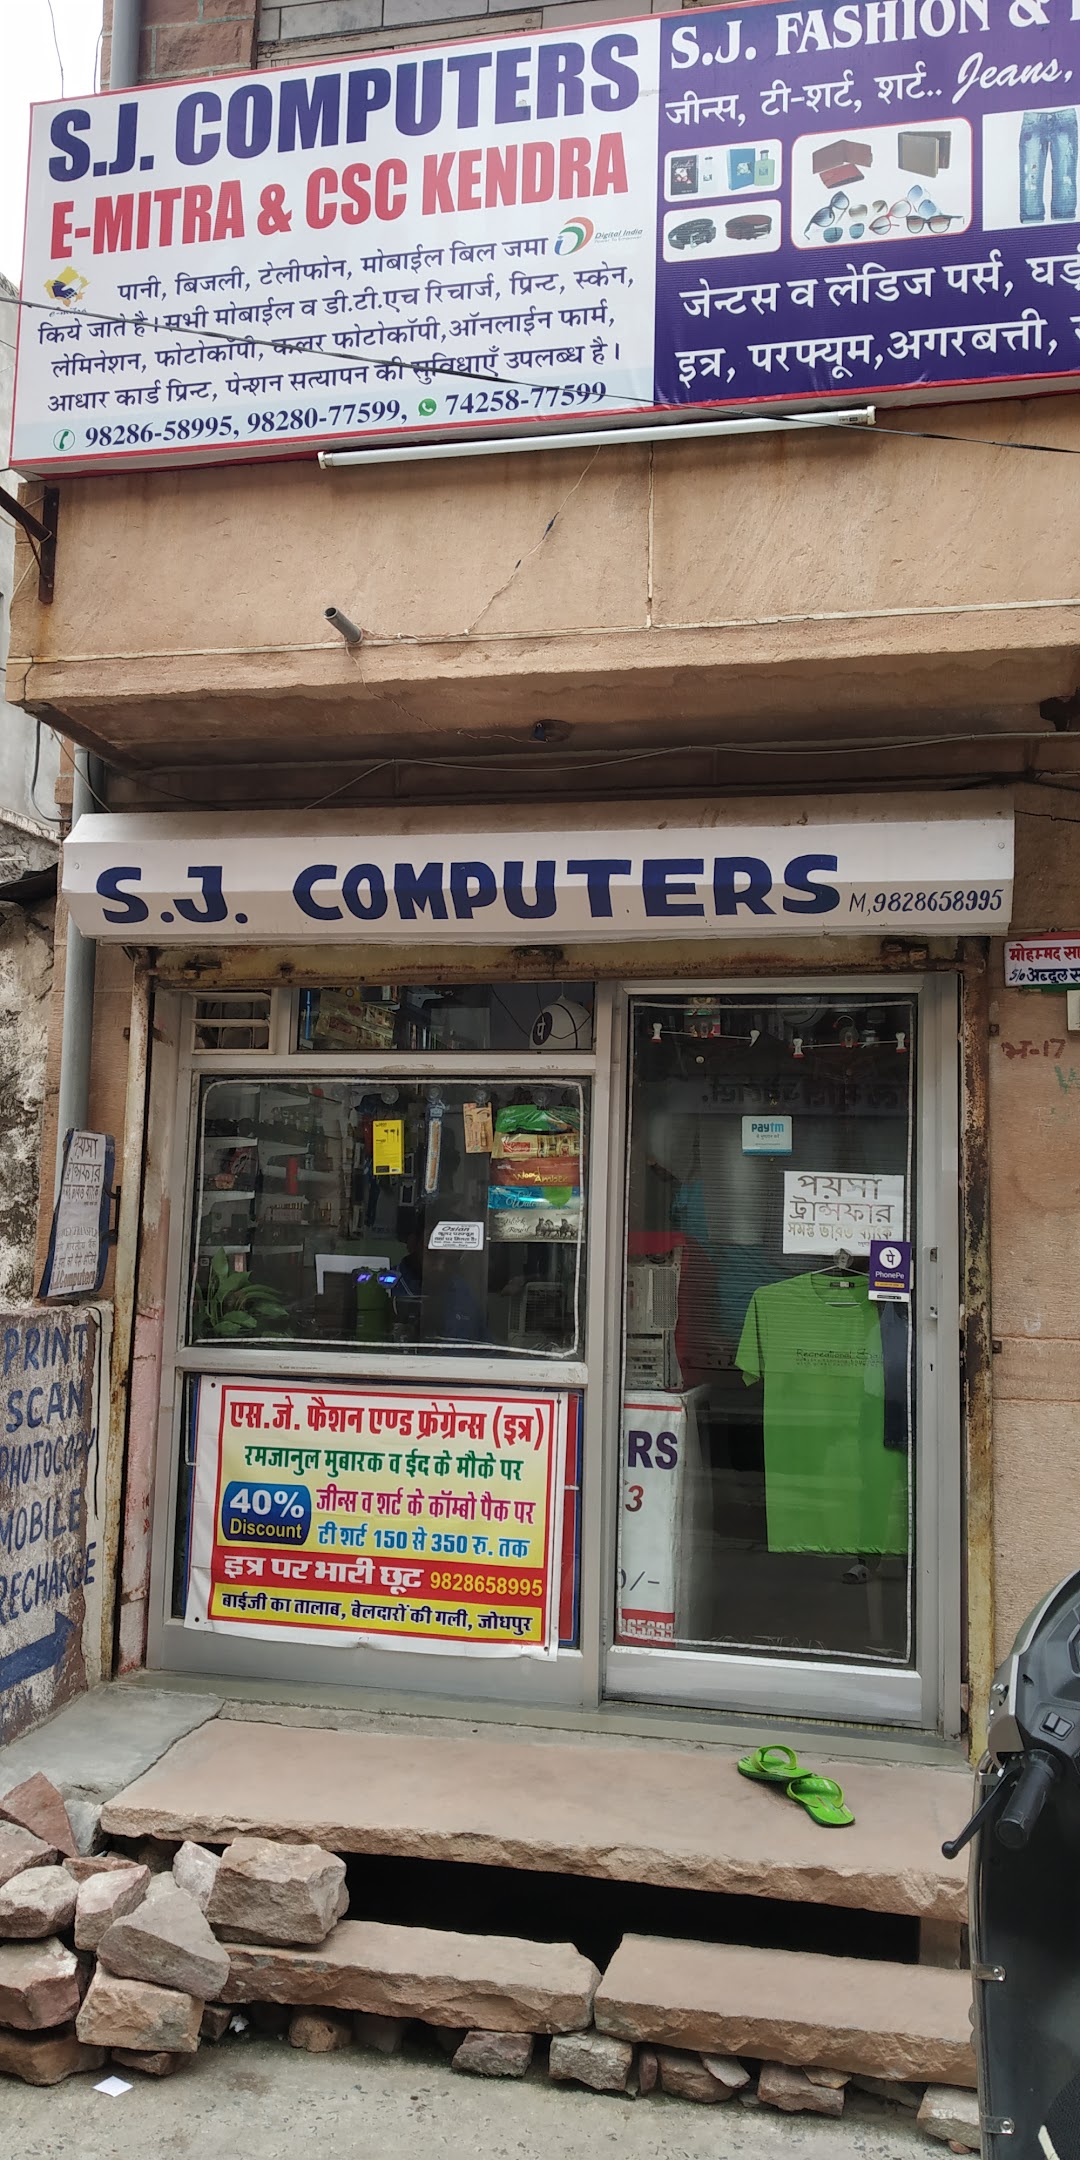 S.J.Computers & Emitra,Fragrance ई मित्र